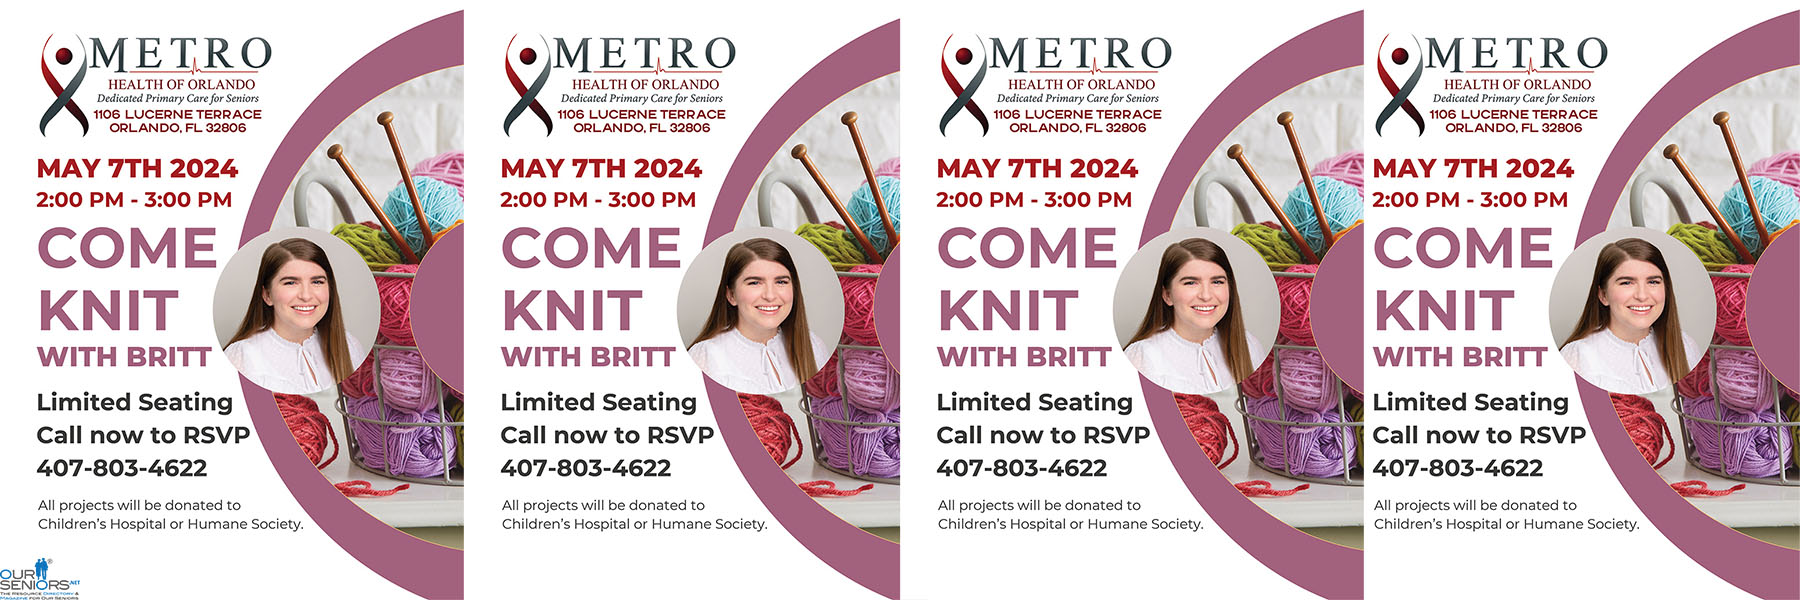 MetroHealth Come Knit With Britt Event May 7 2024 Slider